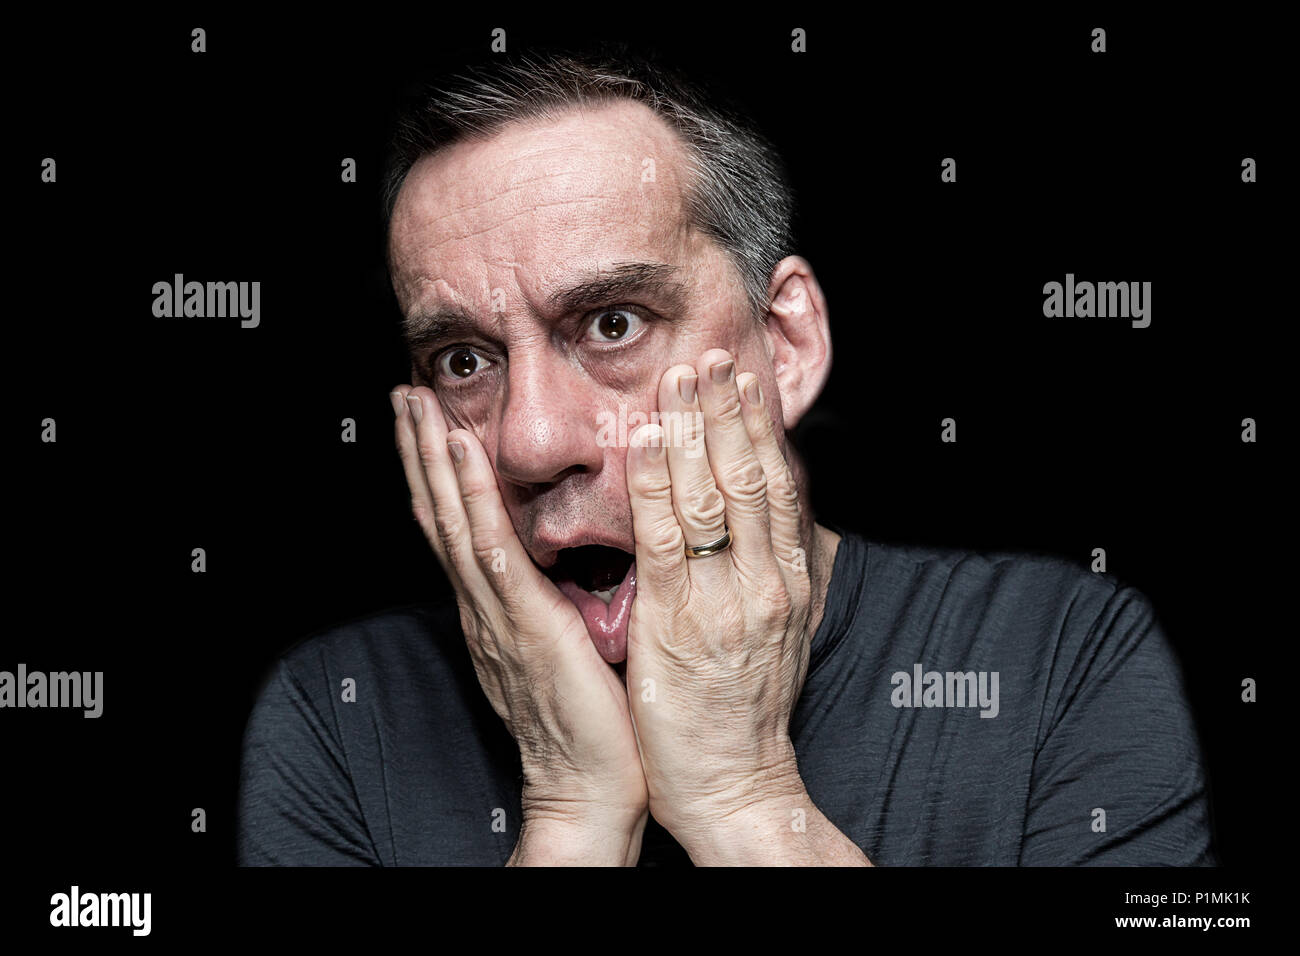 Closeup High Contrast Portrait of Shocked Horrified Man with Hands to Face on Black Background Stock Photo